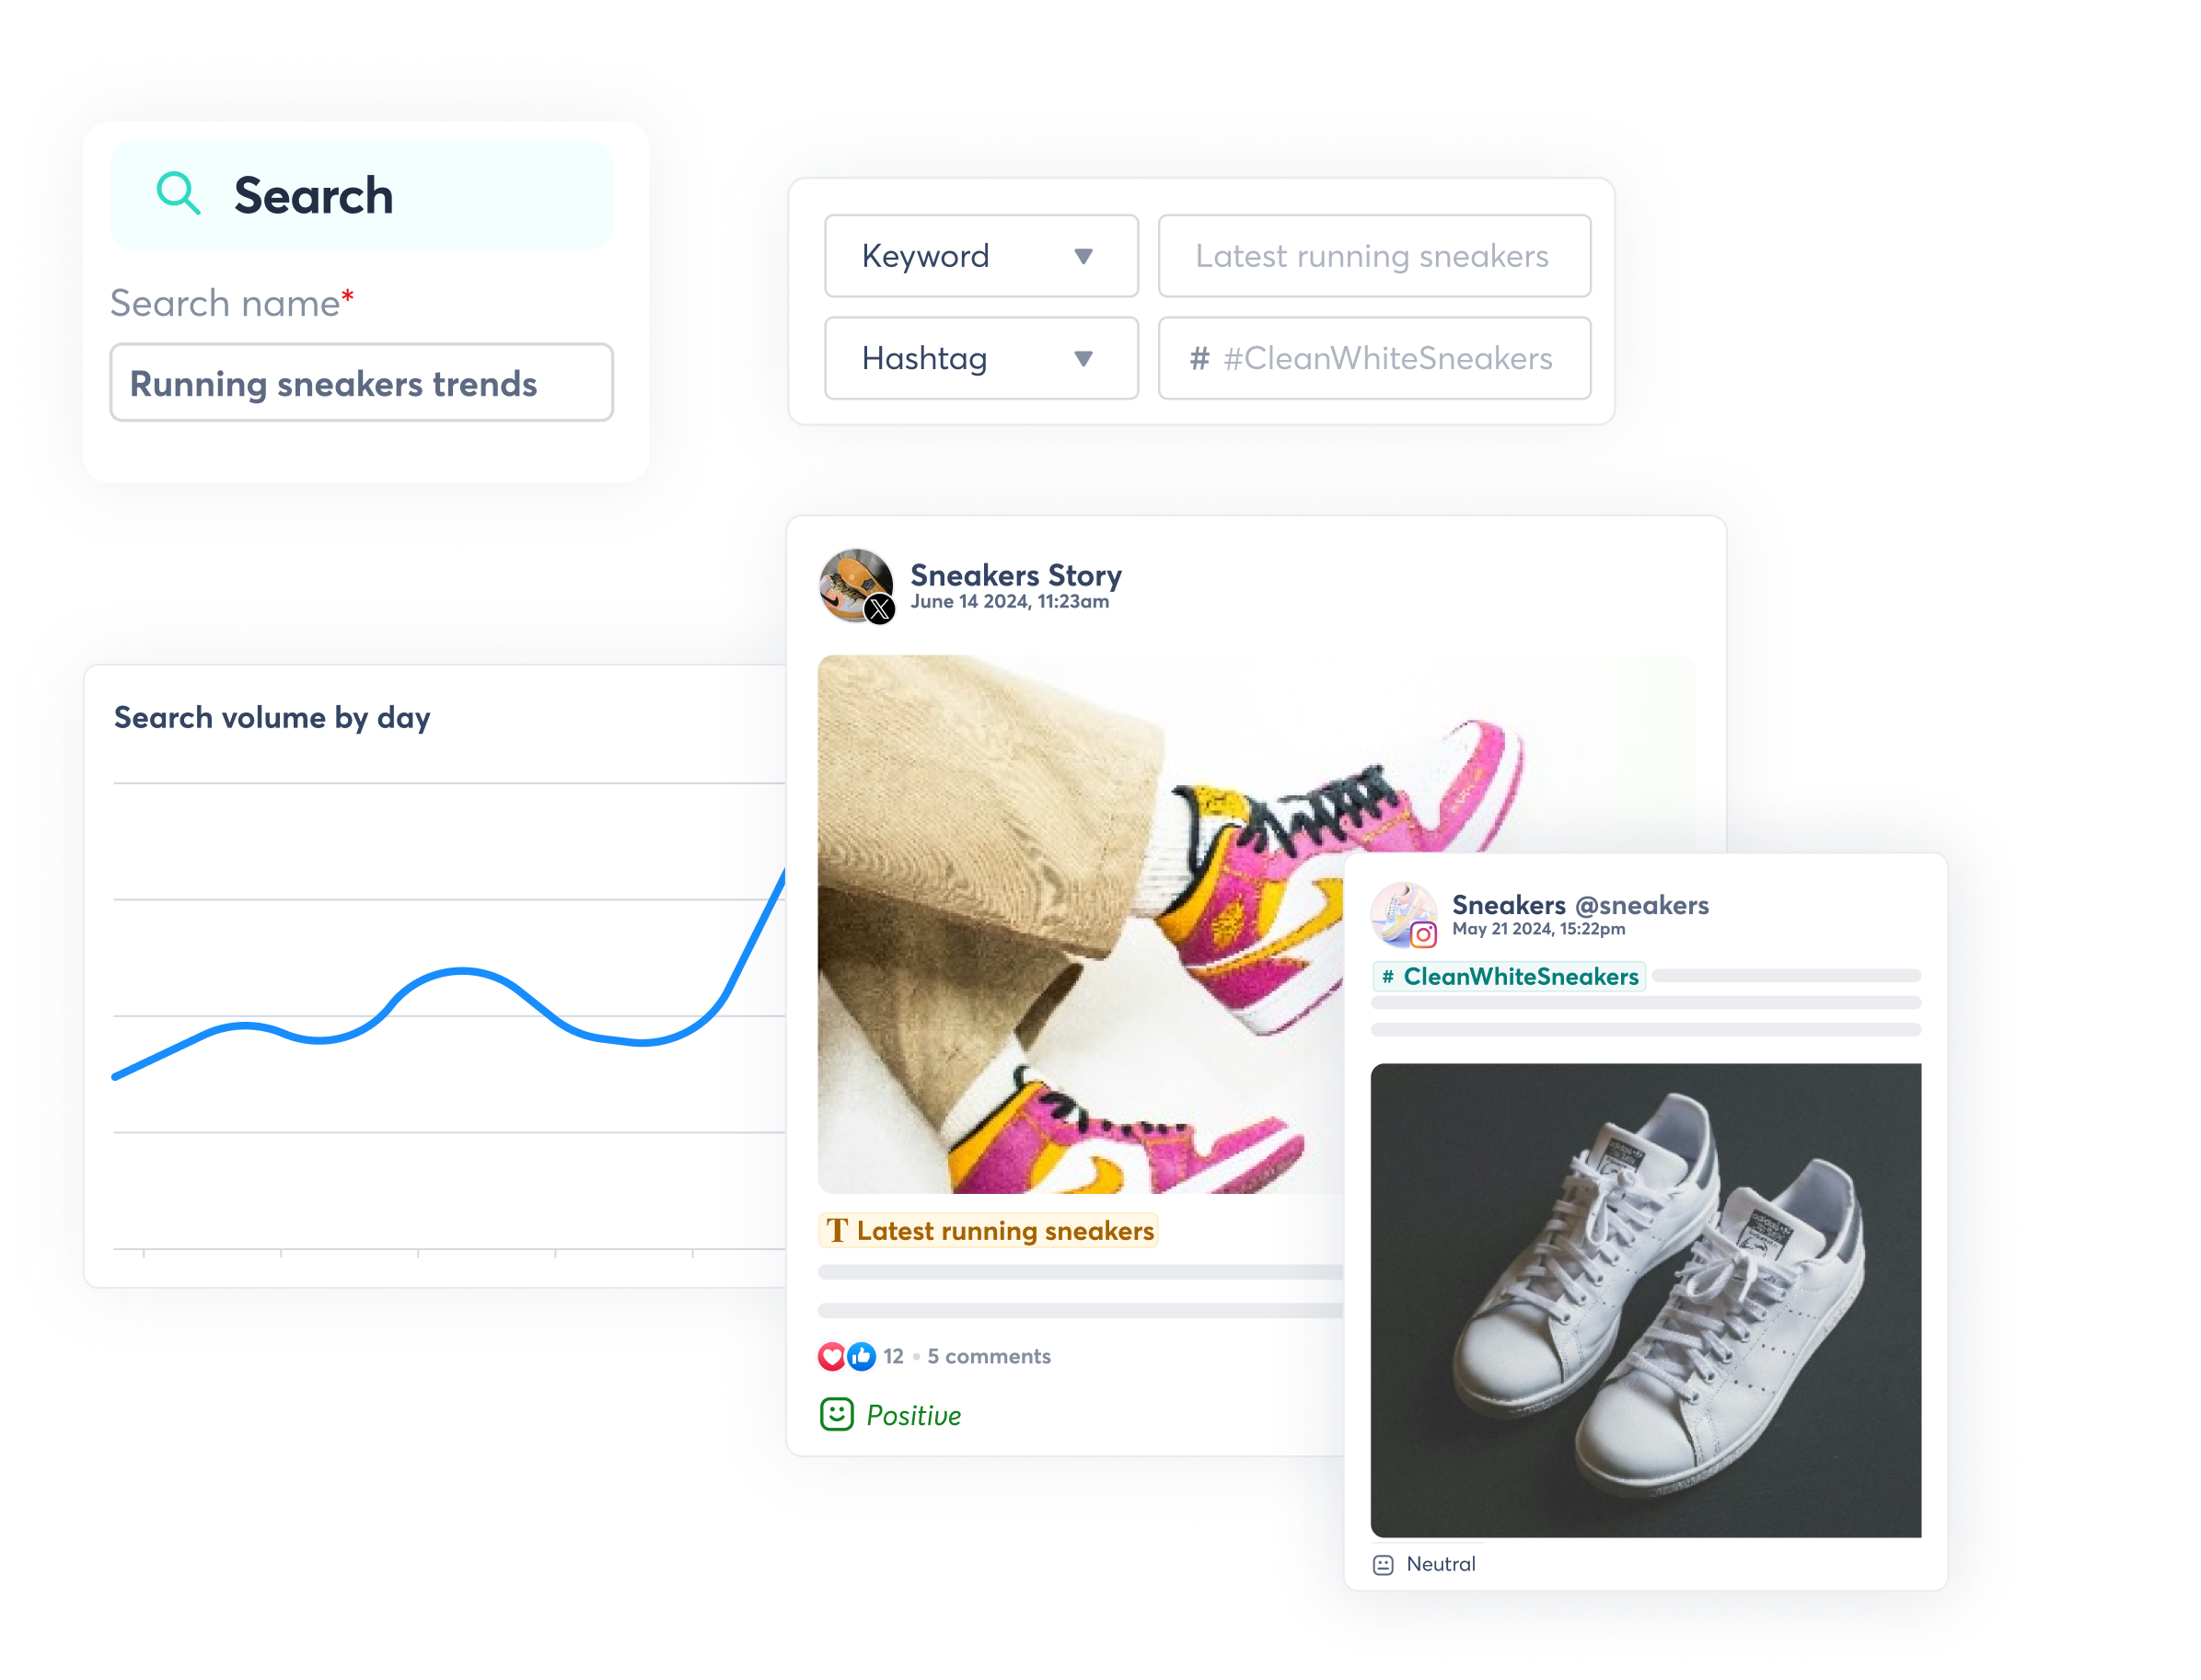 product screens showing how to search through keywords, and hashtags around current and future topics that matter